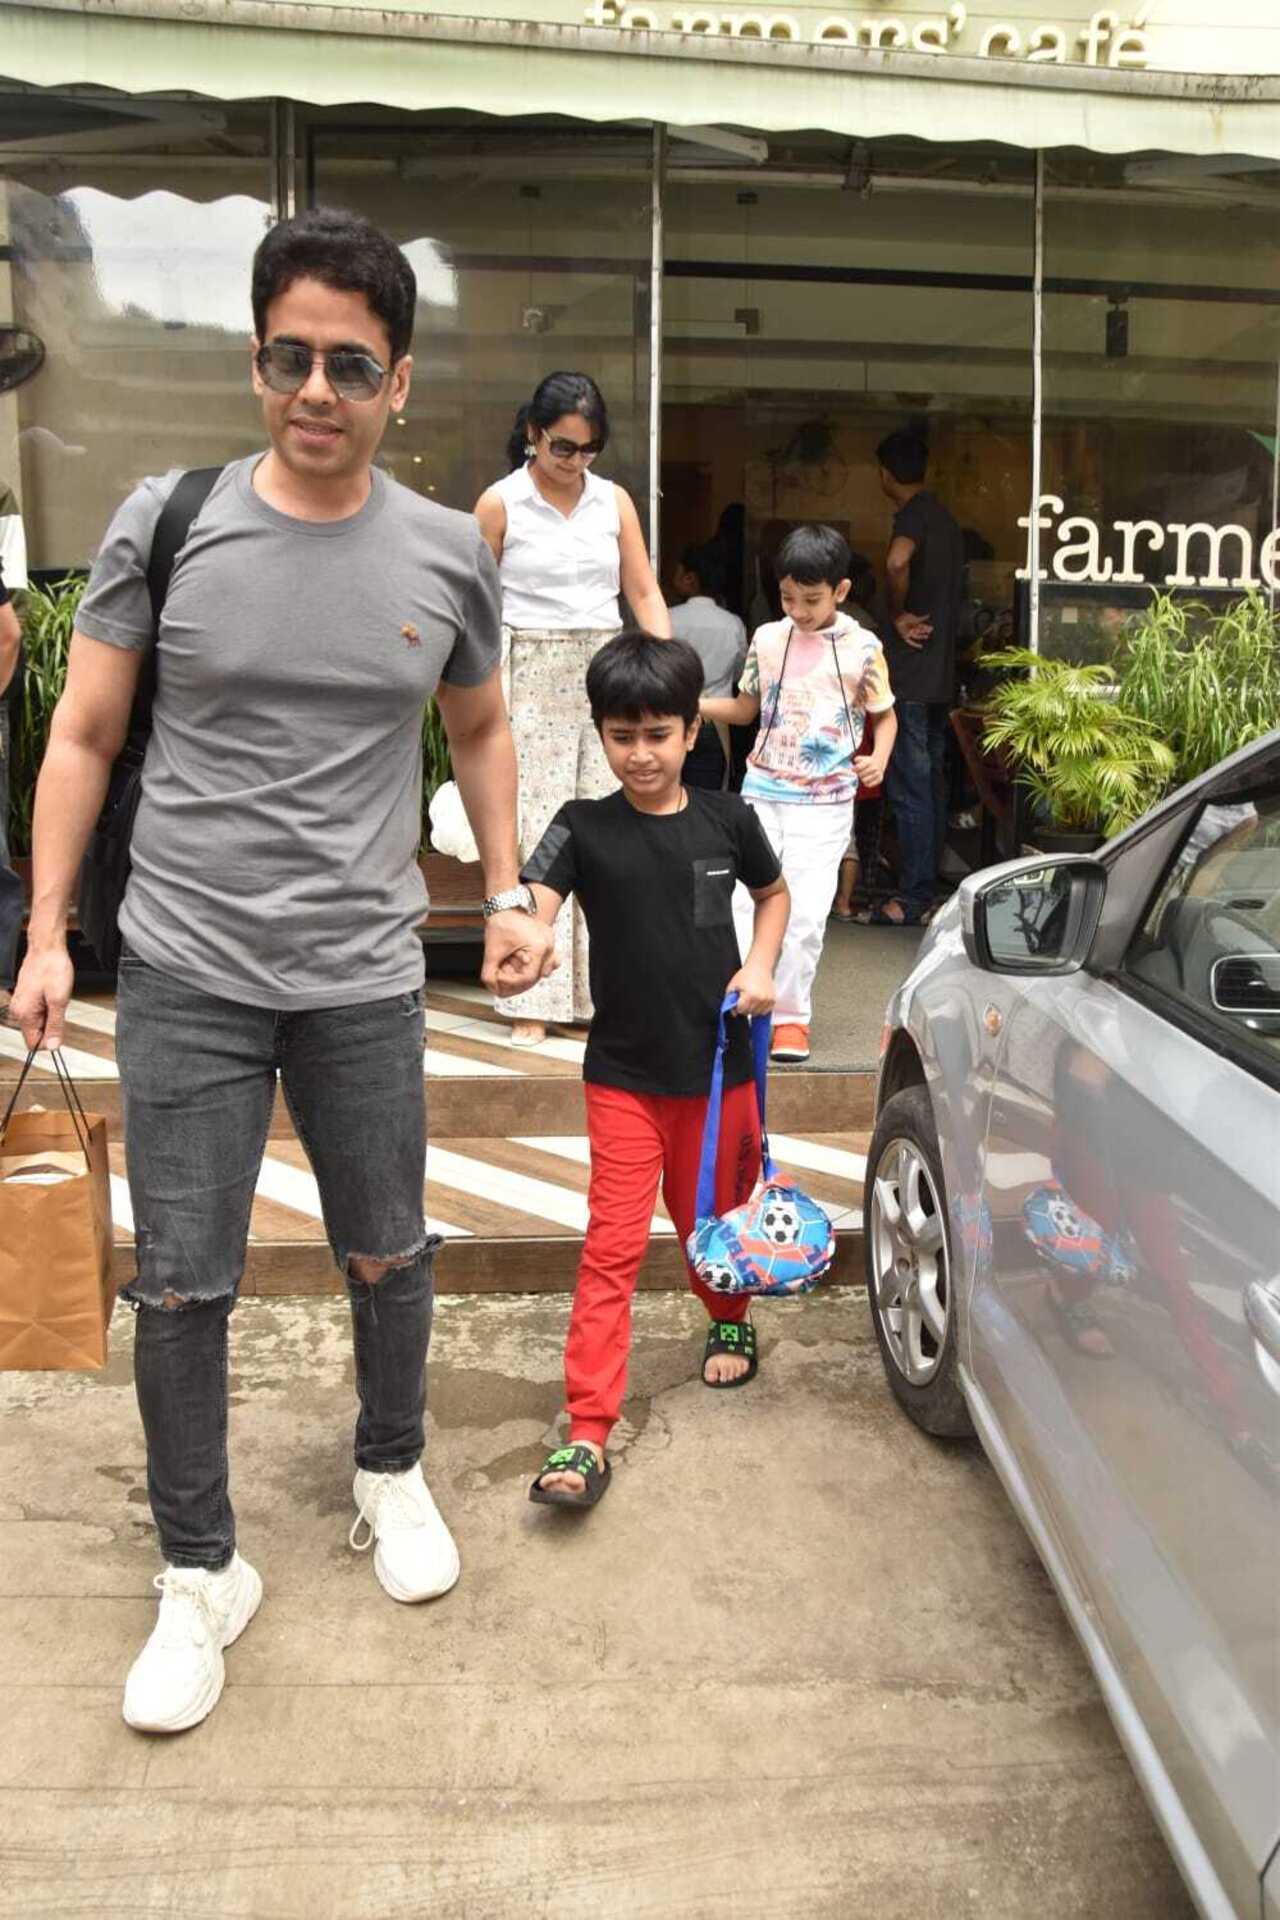 Actor Tusshar Kapoor was spotted in the city with his son at Farmer's cafe